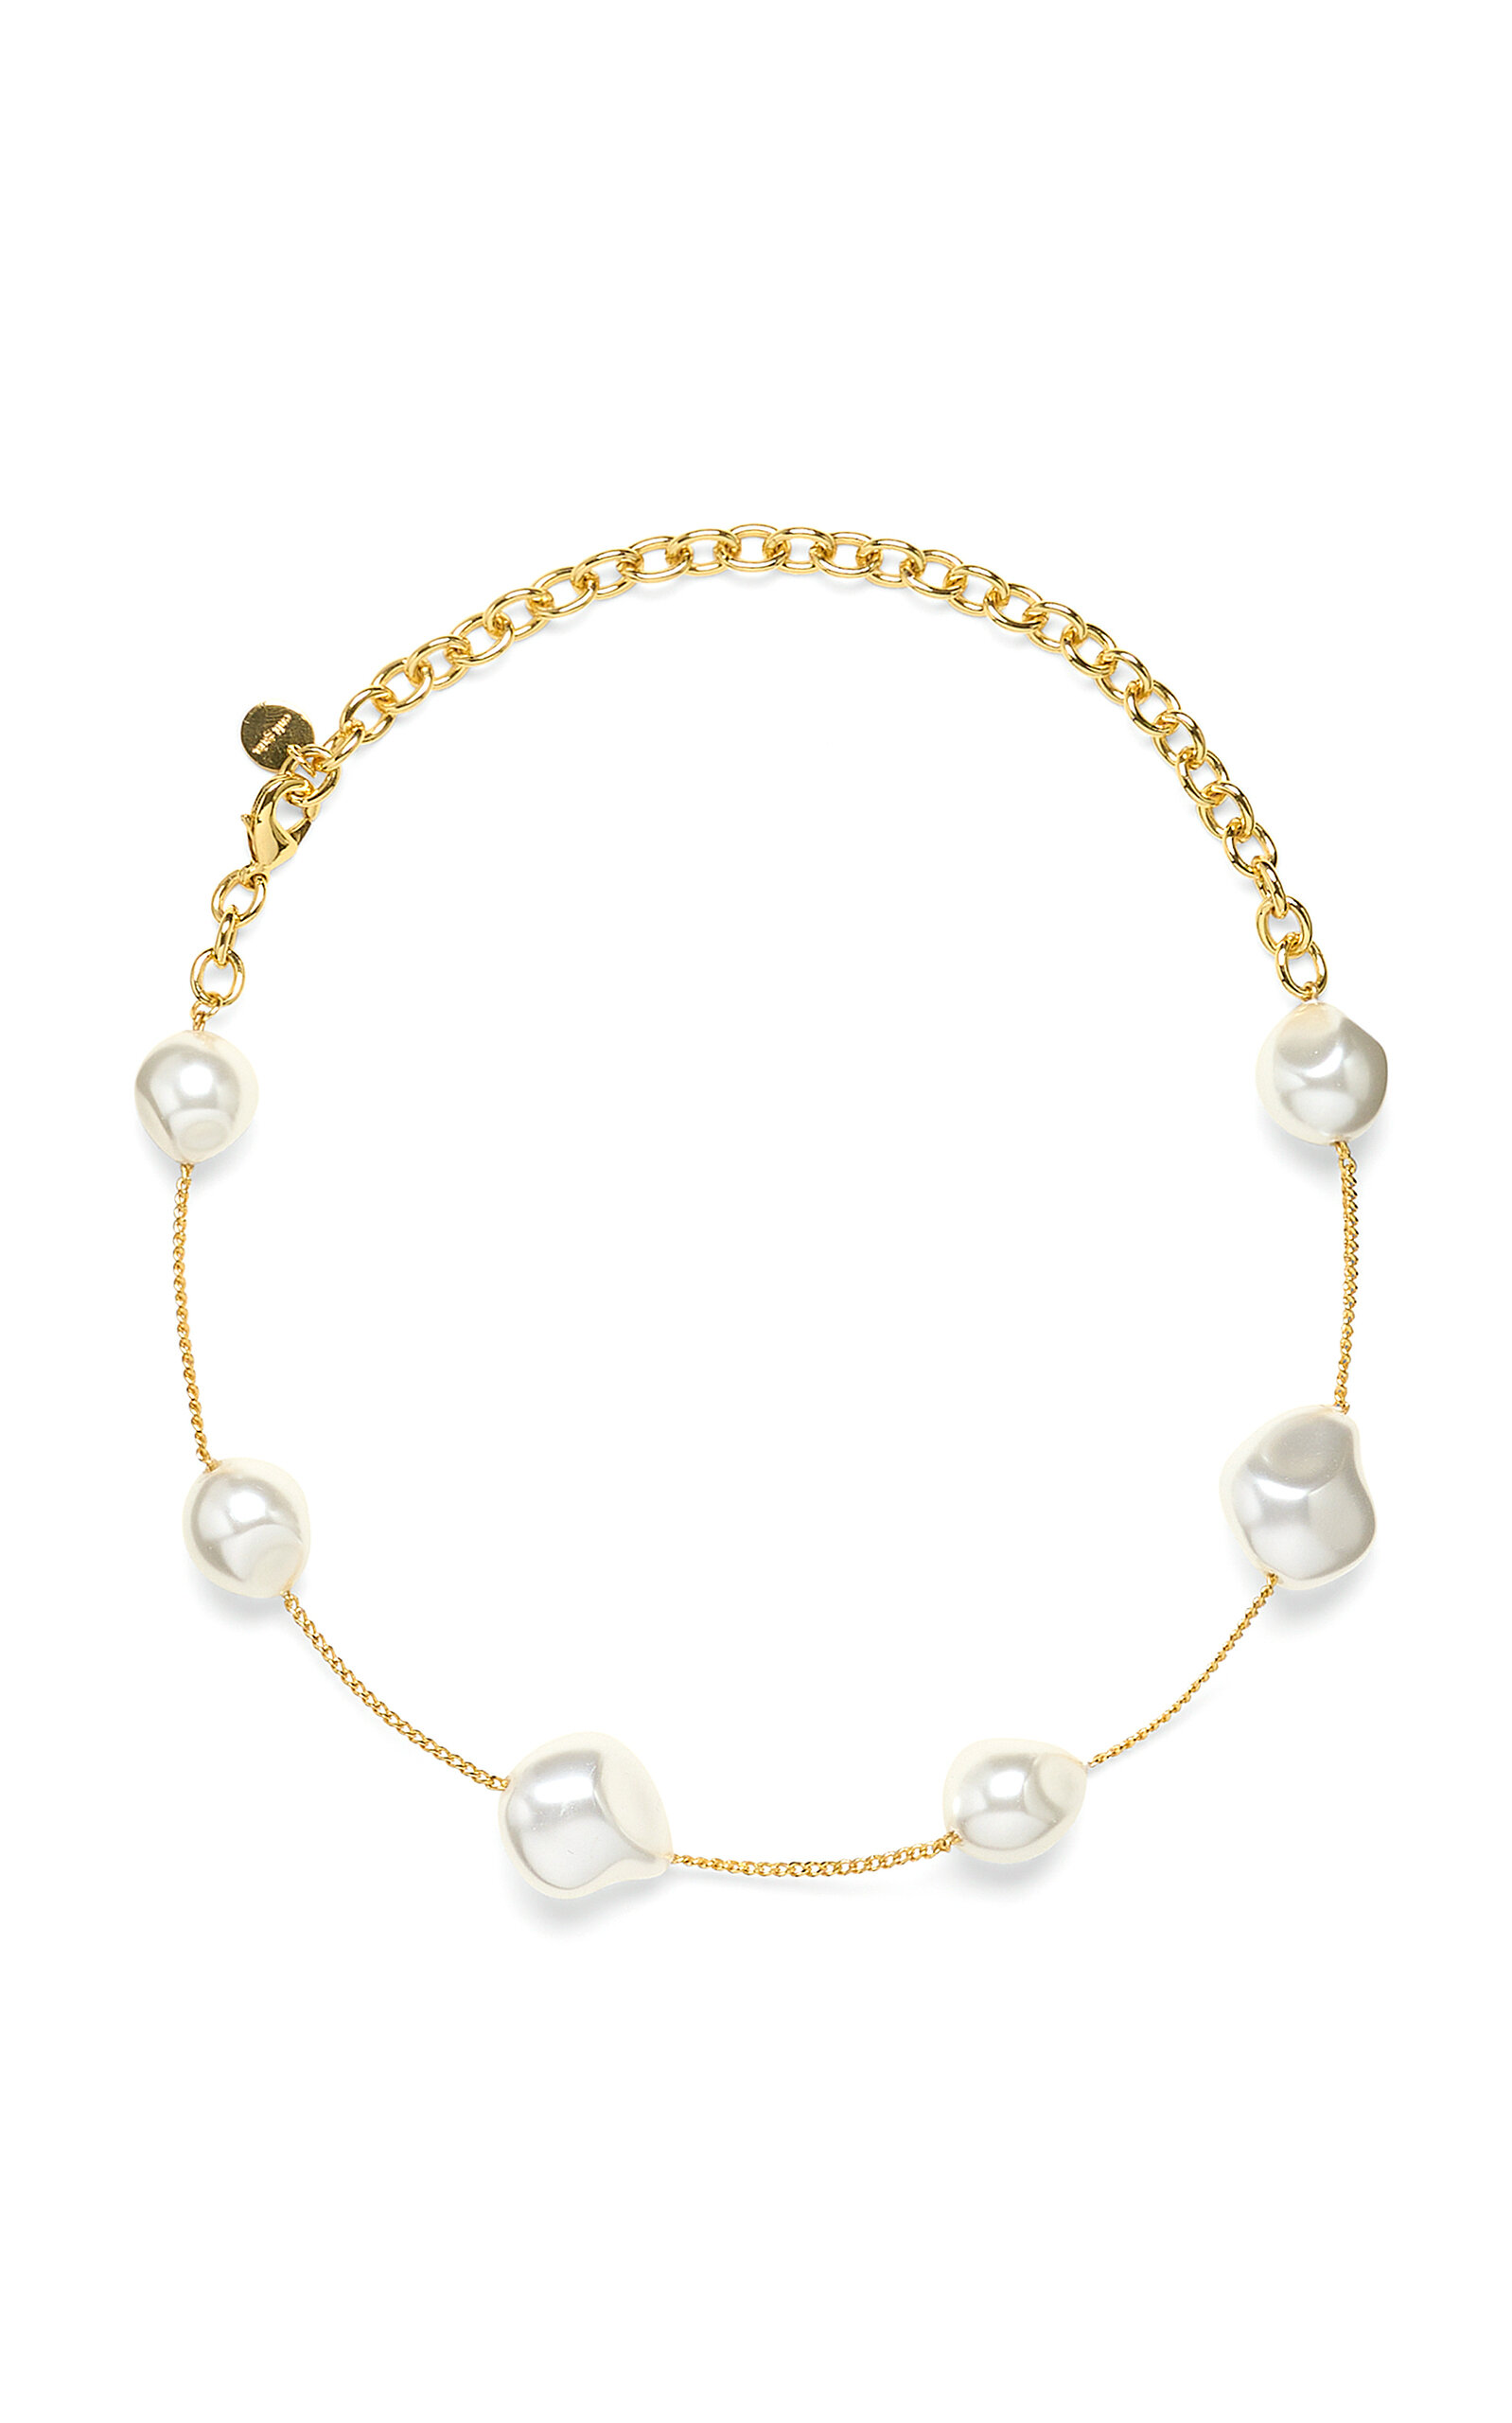 Cult Gaia - Andie Beaded Gold-Tone Necklace - White - OS - Moda Operandi - Gifts For Her